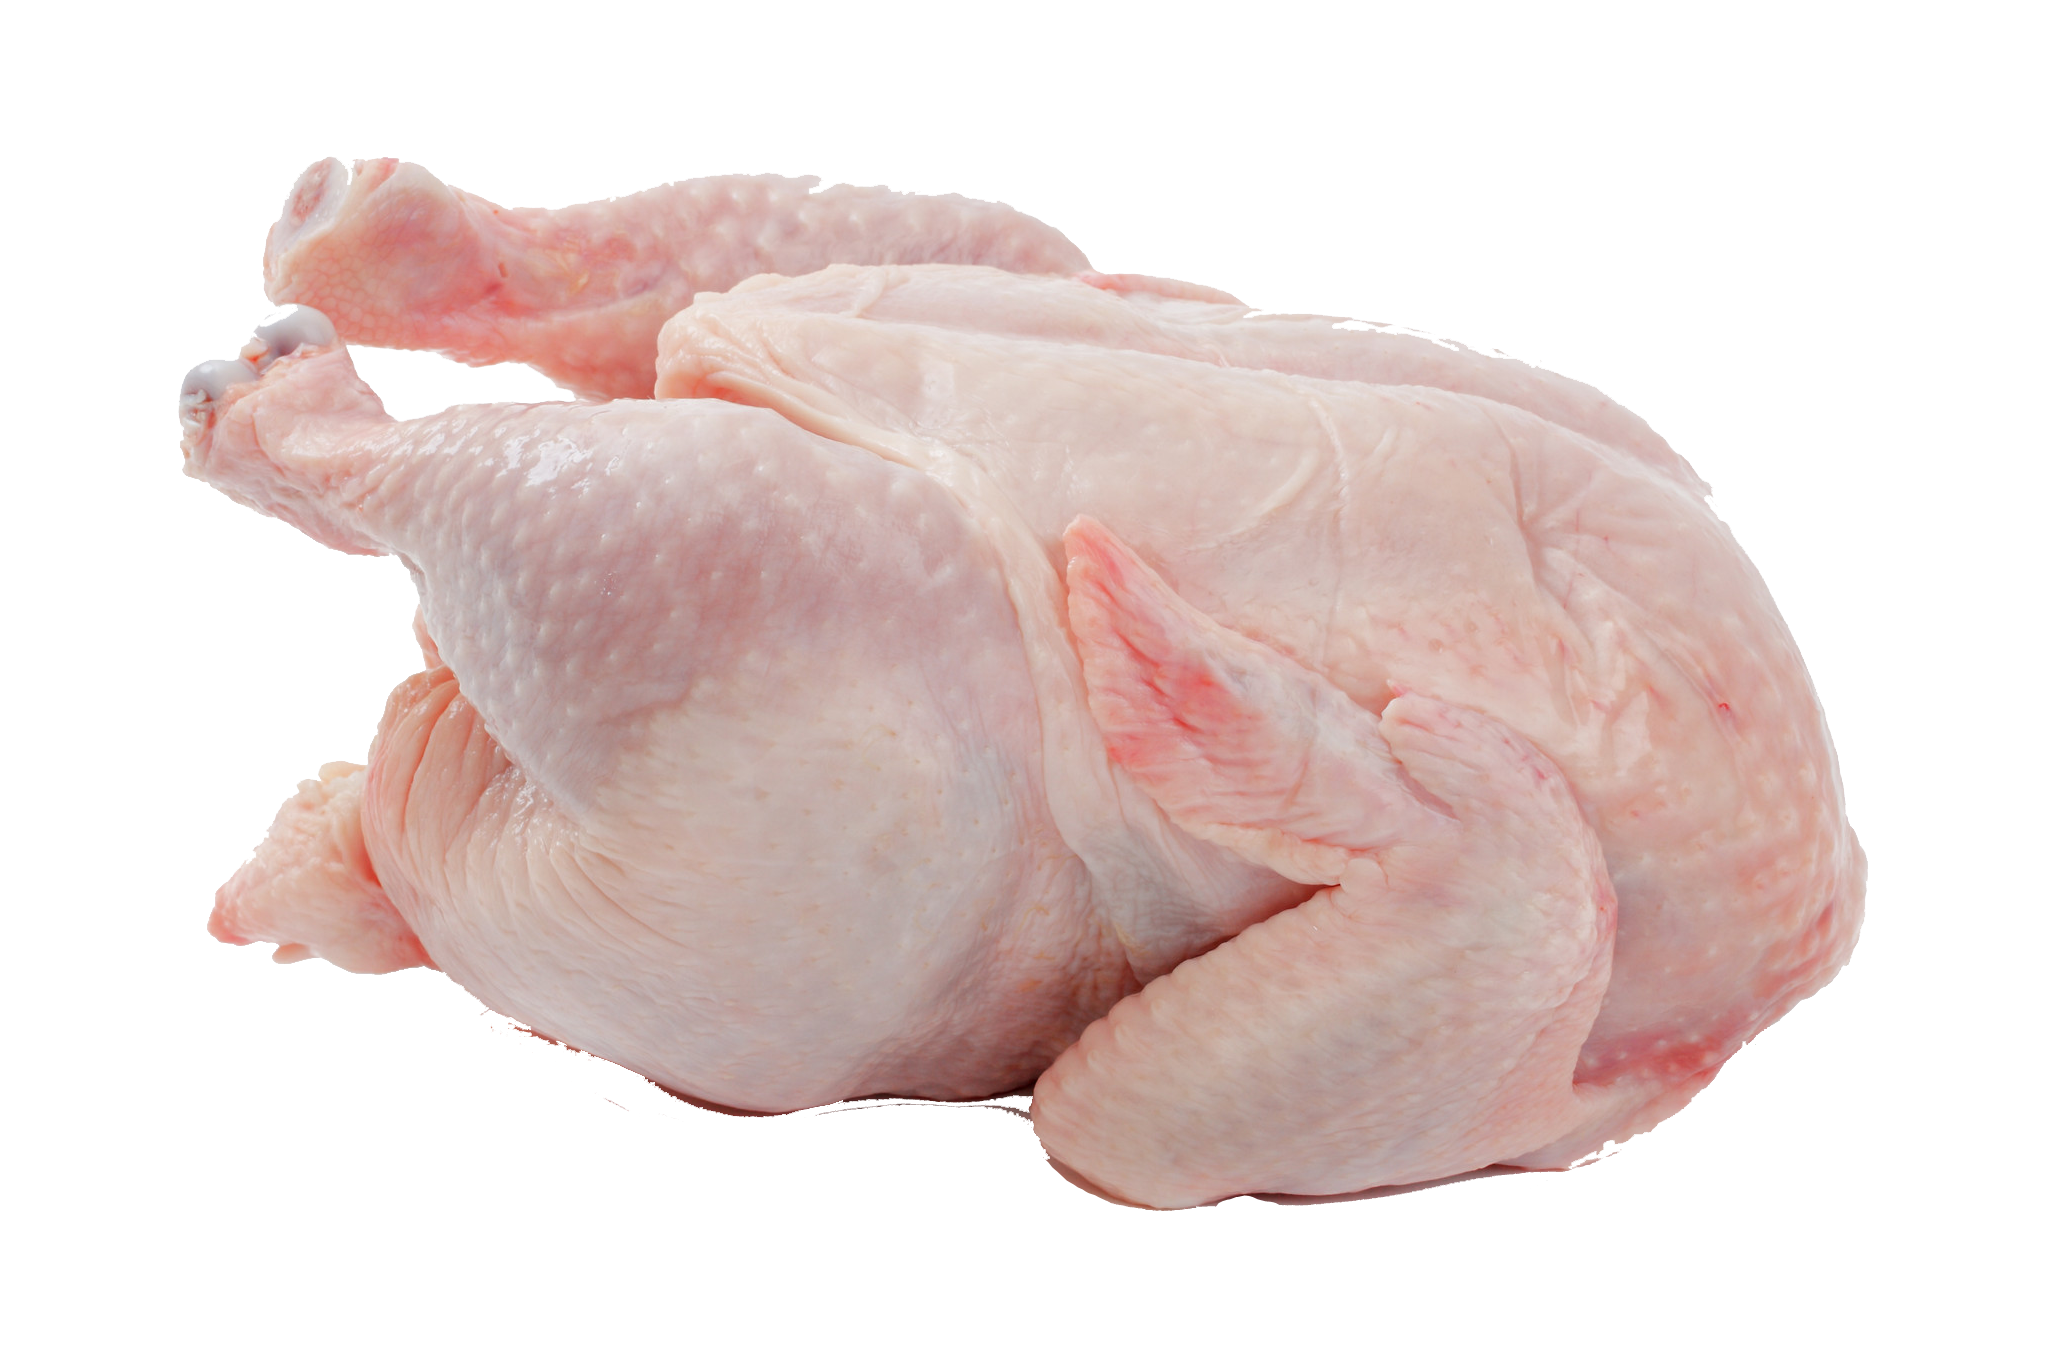 Download Chicken Meat HQ PNG Image | FreePNGImg